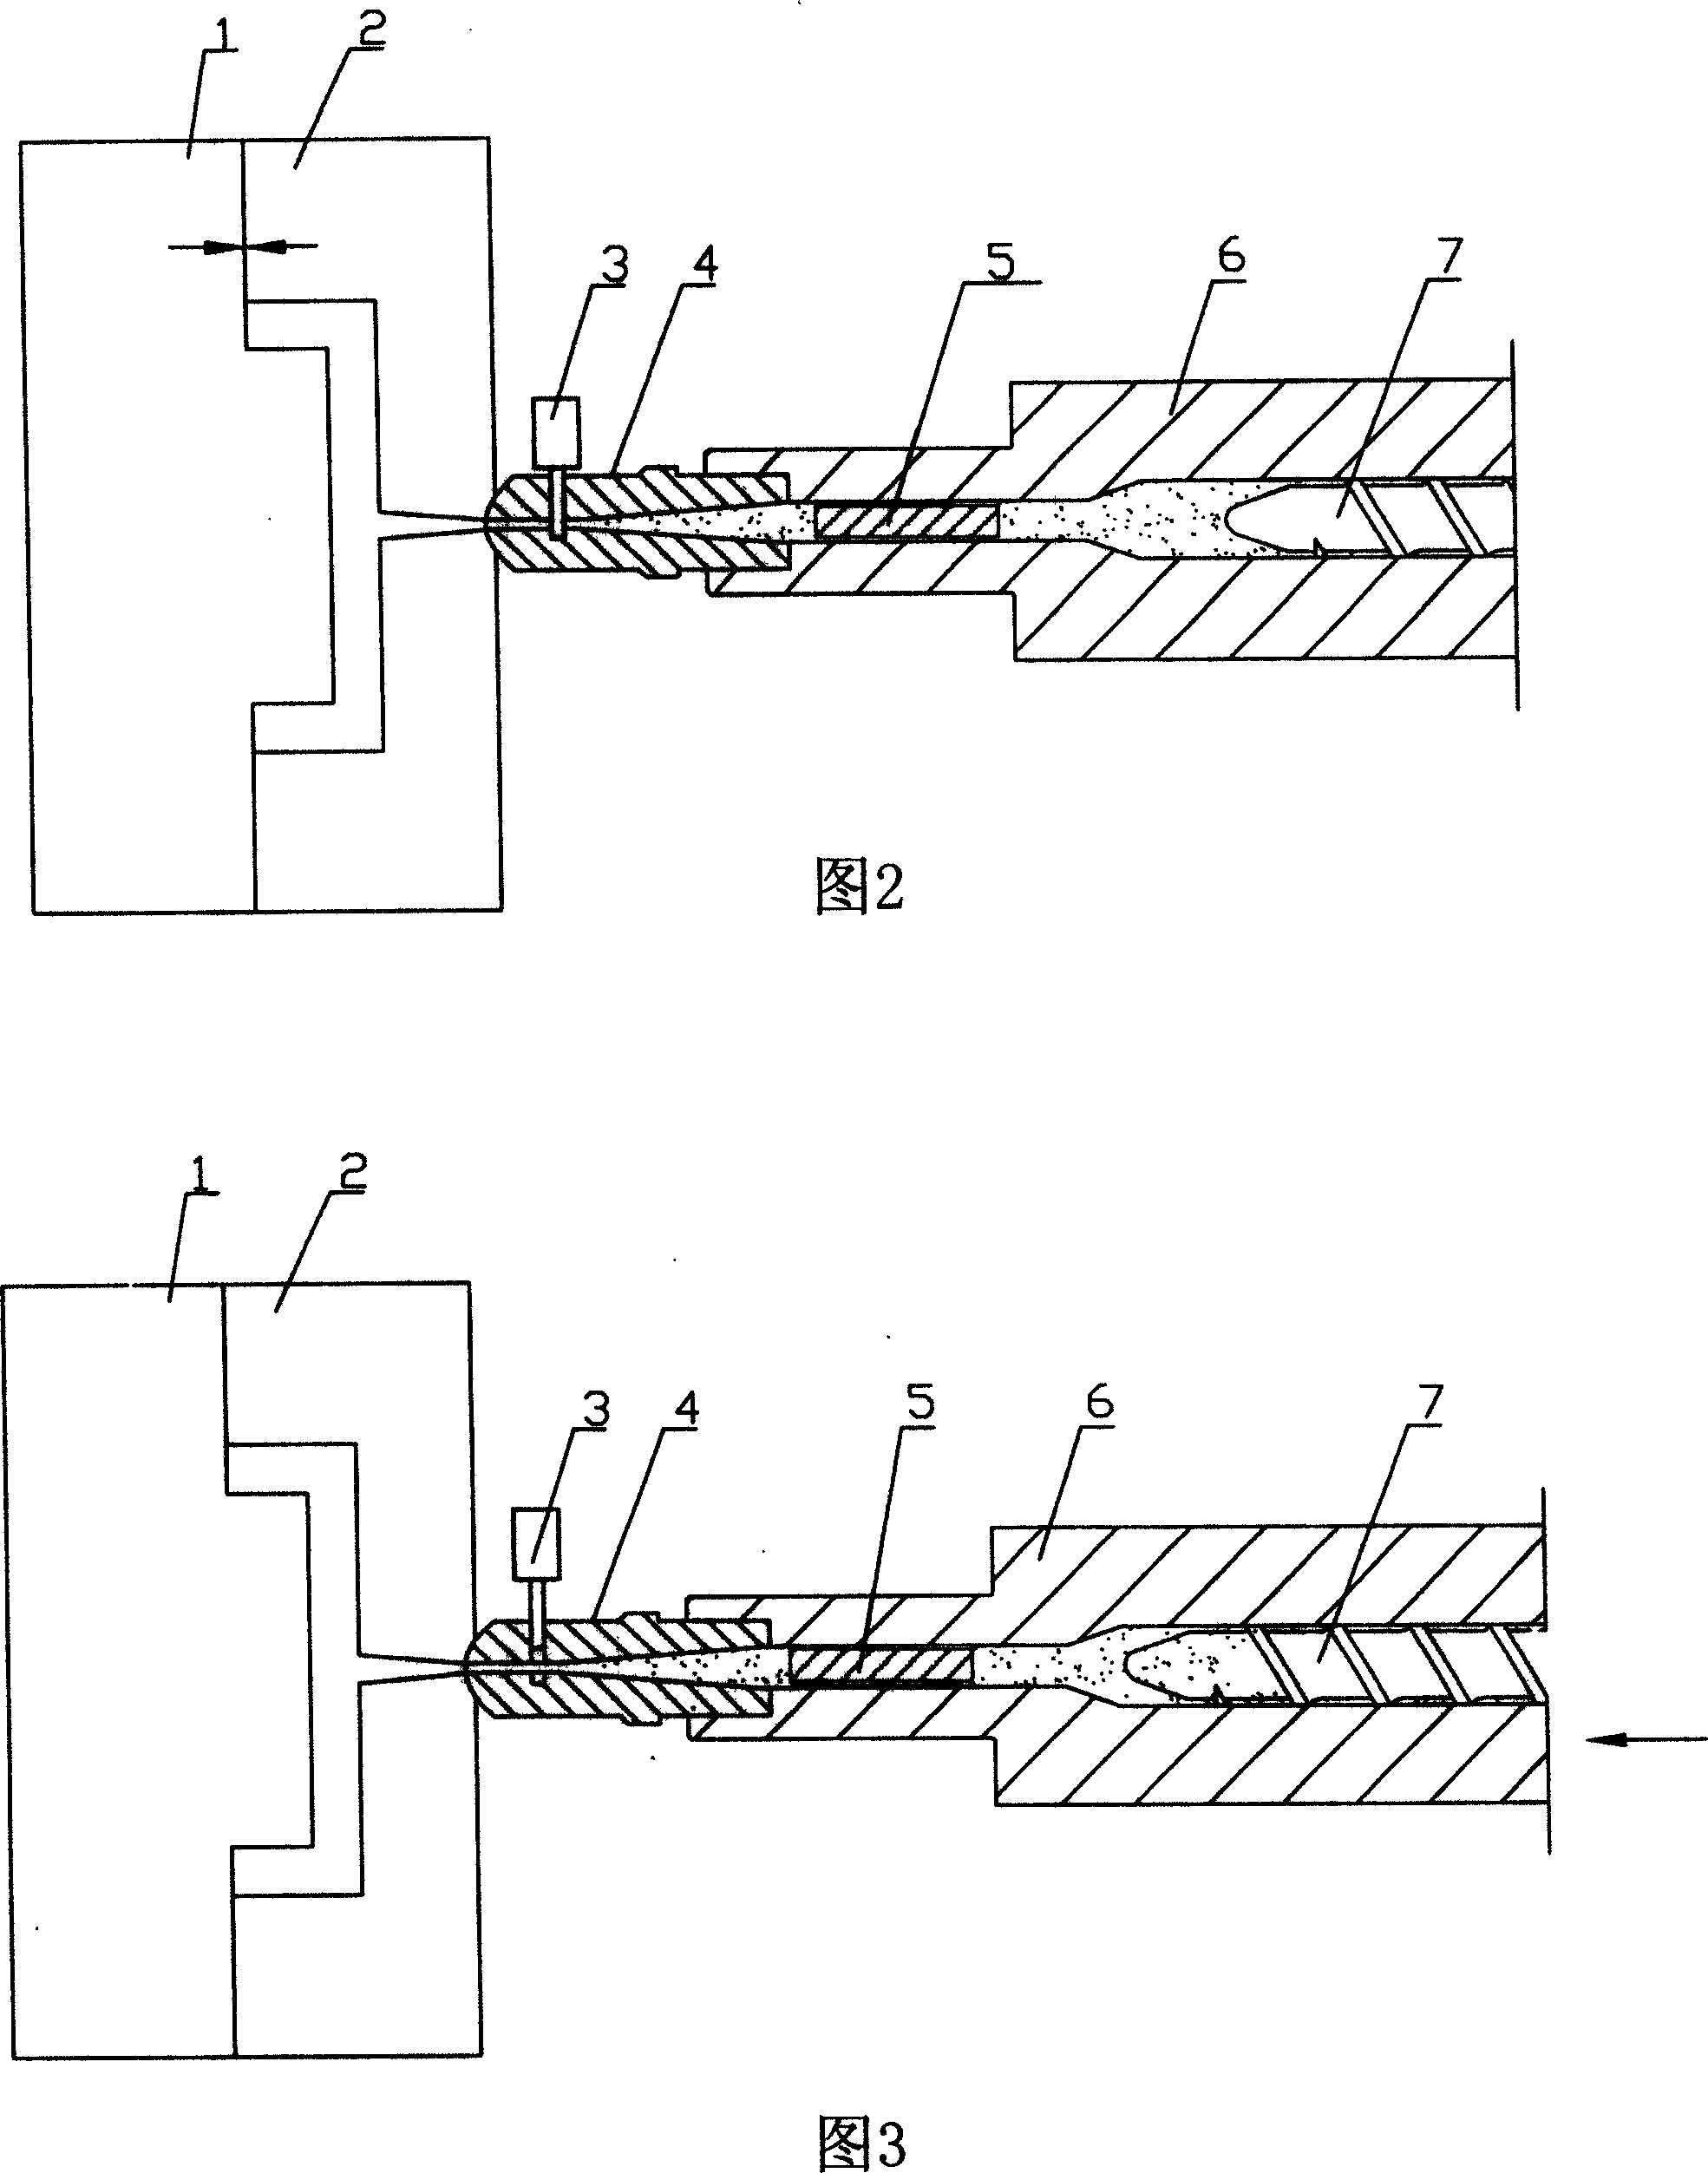 Chemical foaming prepressing high speed injection molding method